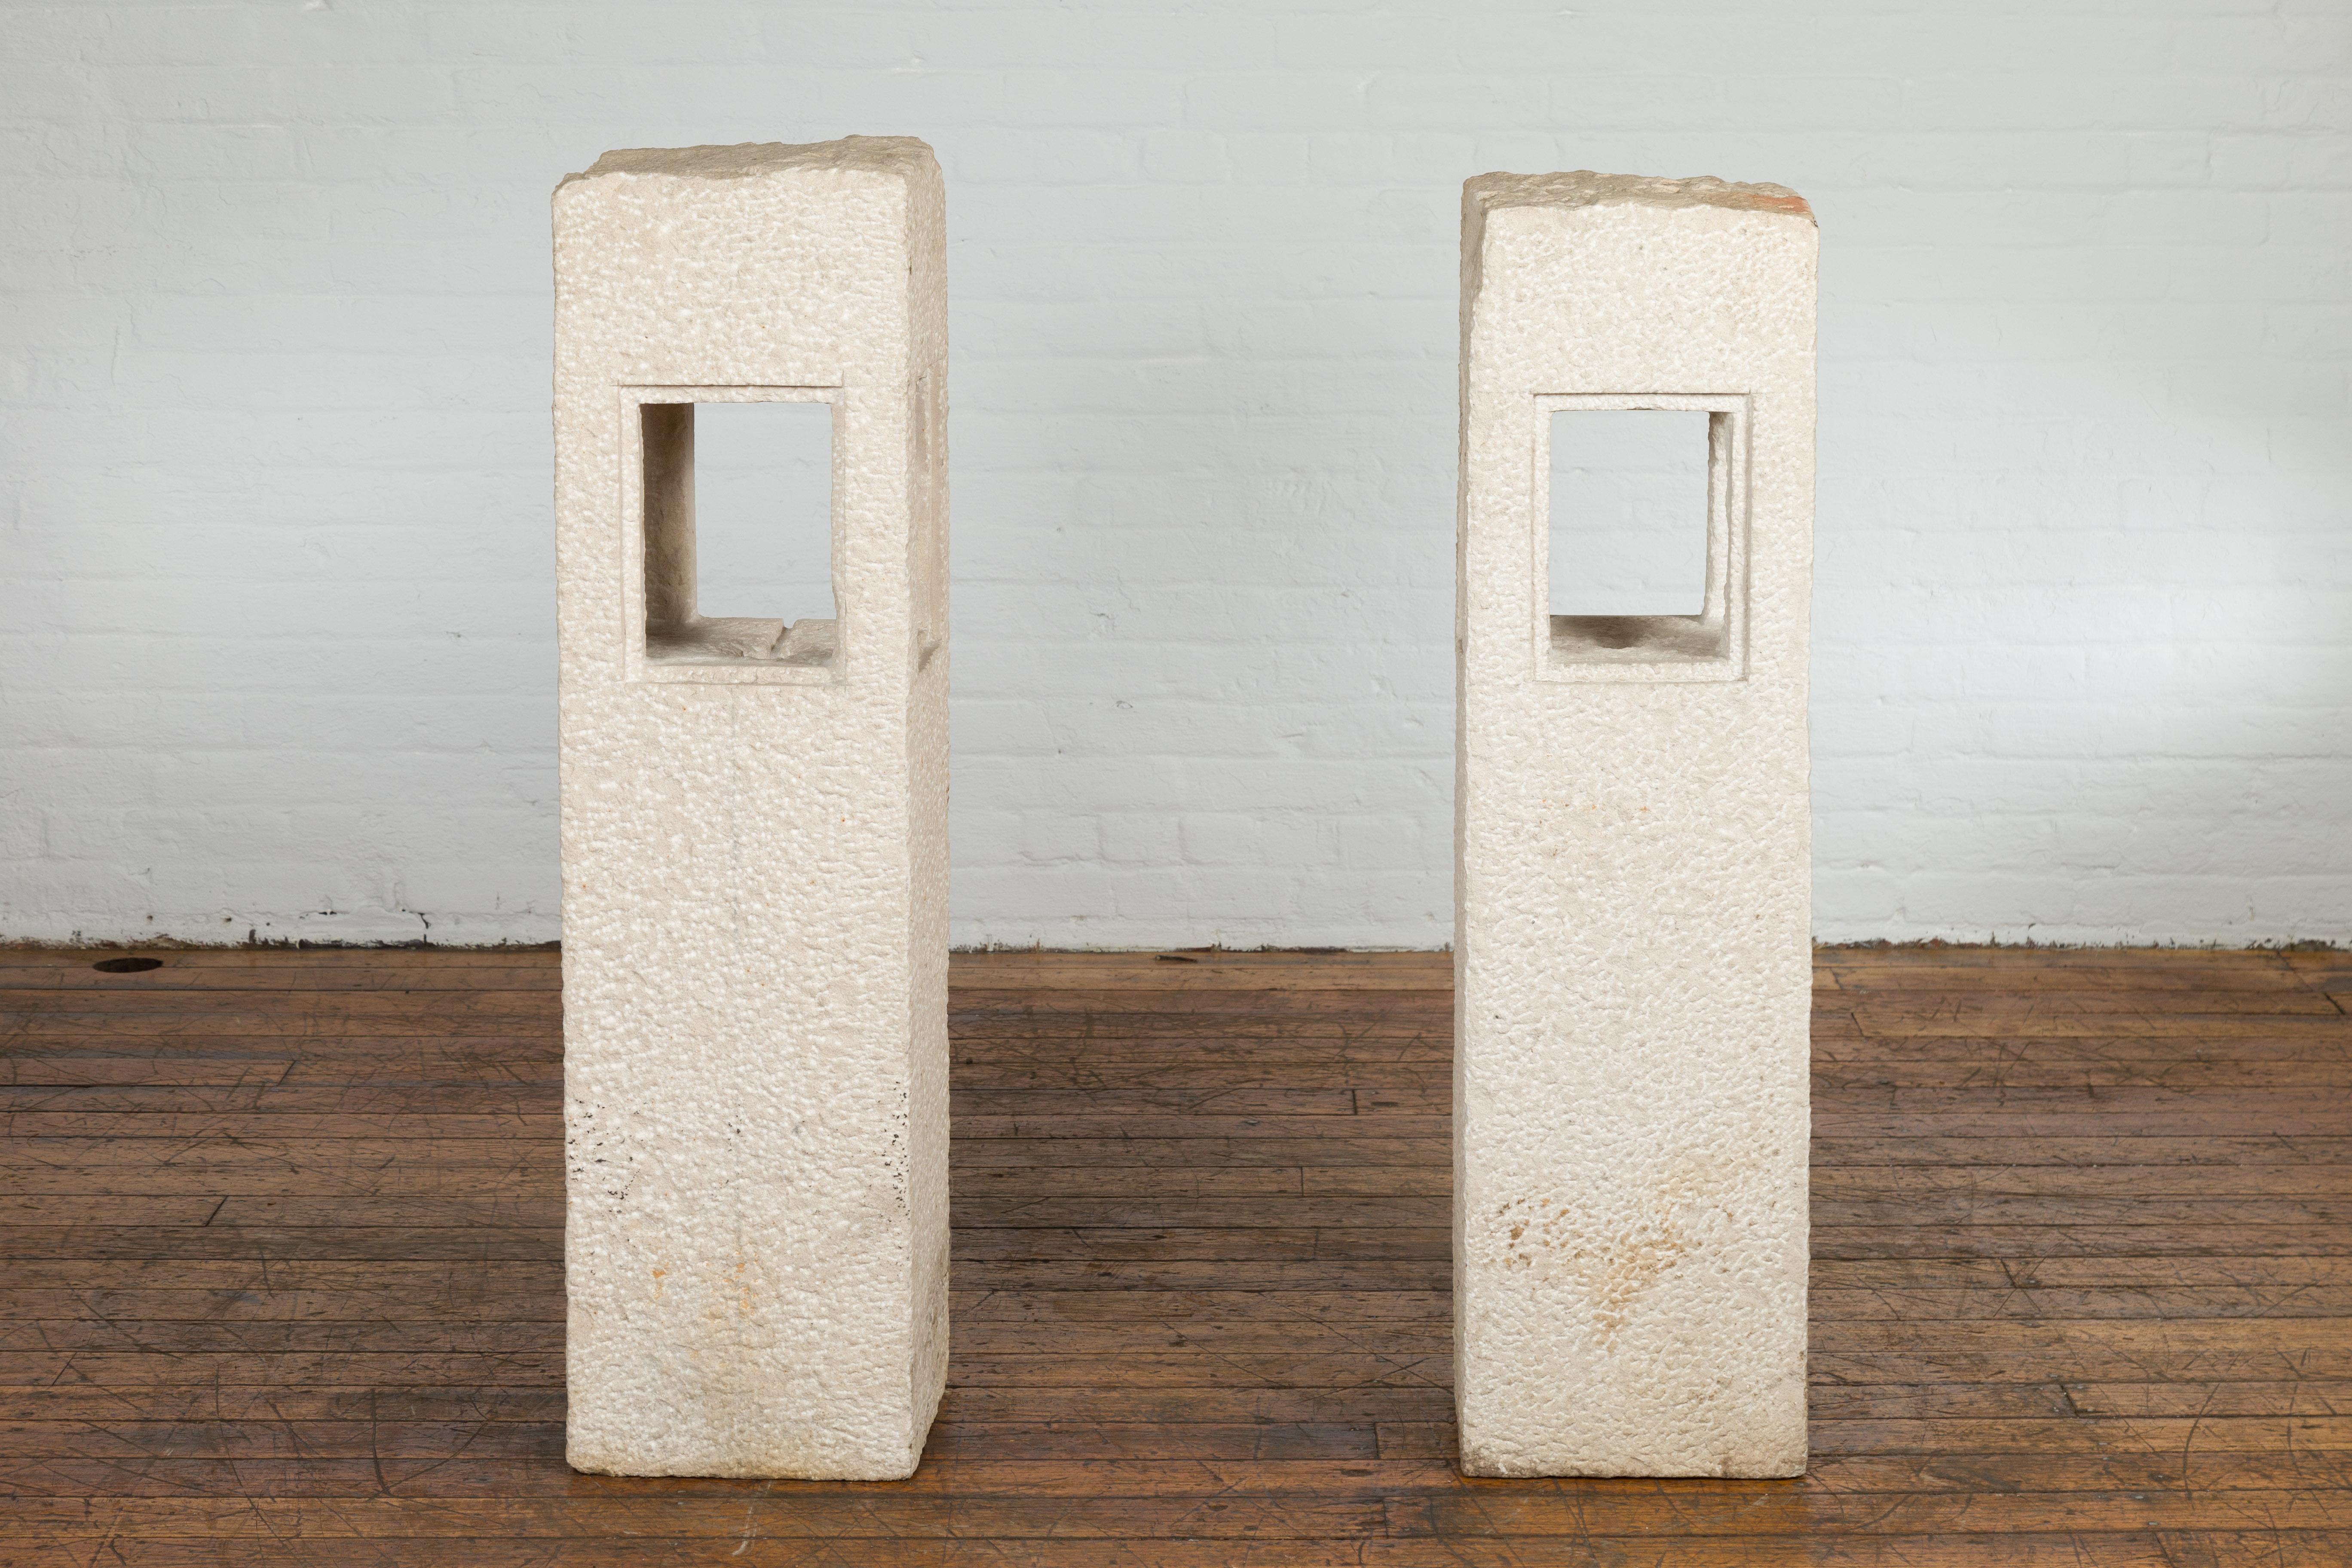 A pair of Japanese Toro stone lanterns from the early 20th century, with candle holders and wax area. Created in Japan during the early years of the 20th century, this pair of Toro stone lanterns features a linear silhouette accented by a central